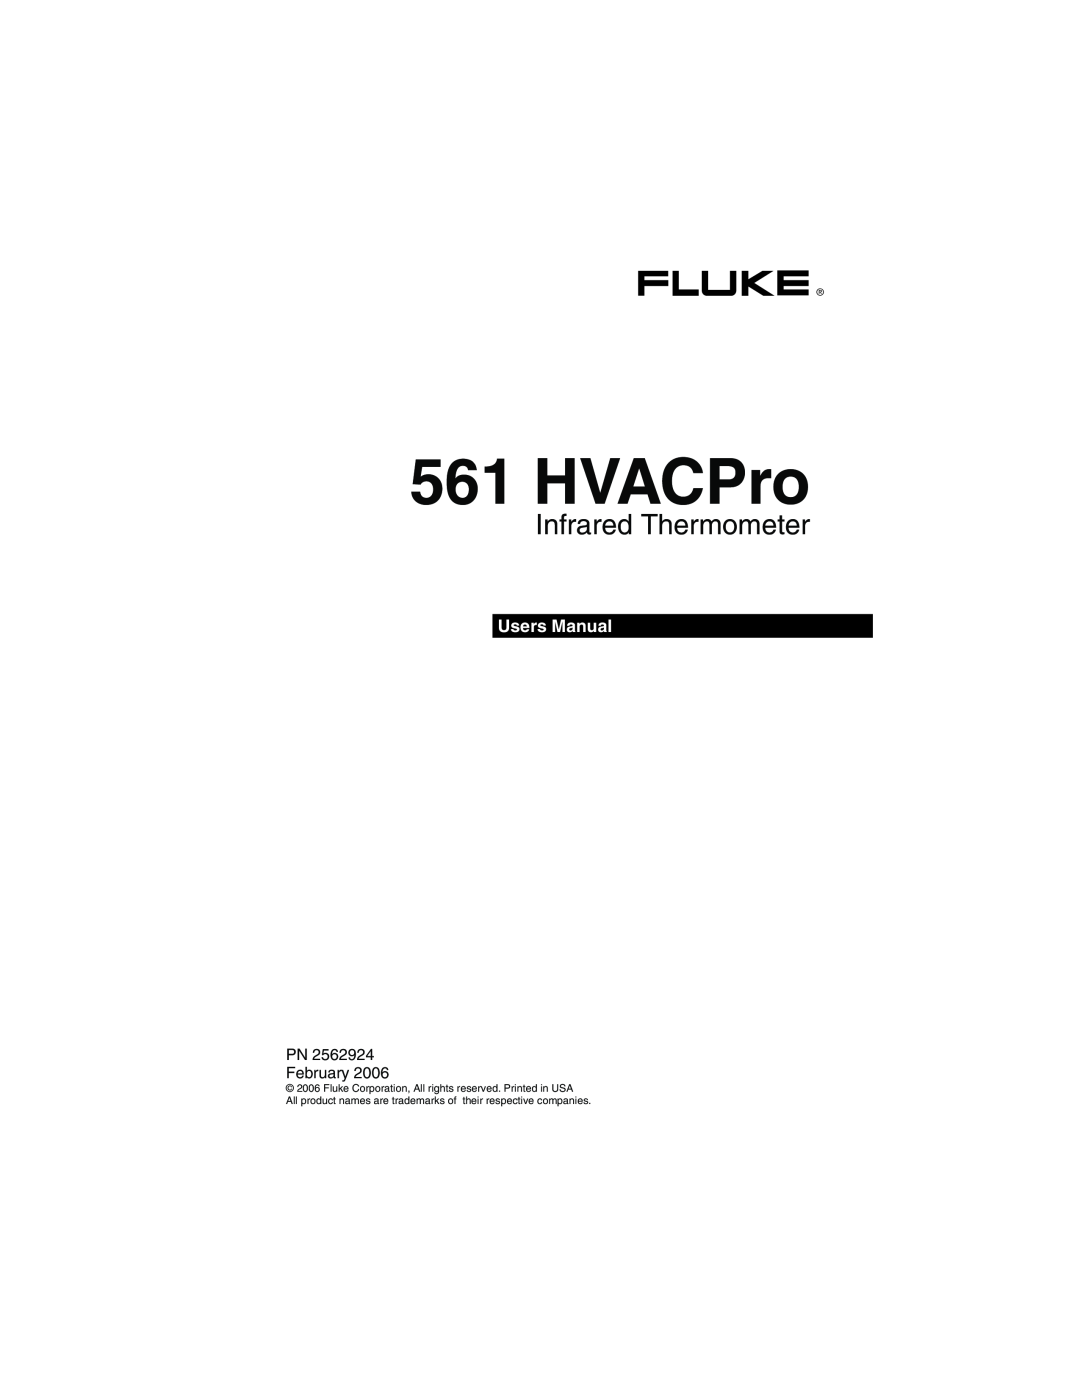 Fluke 561 user manual HVACPro, Infrared Thermometer, Users Manual 